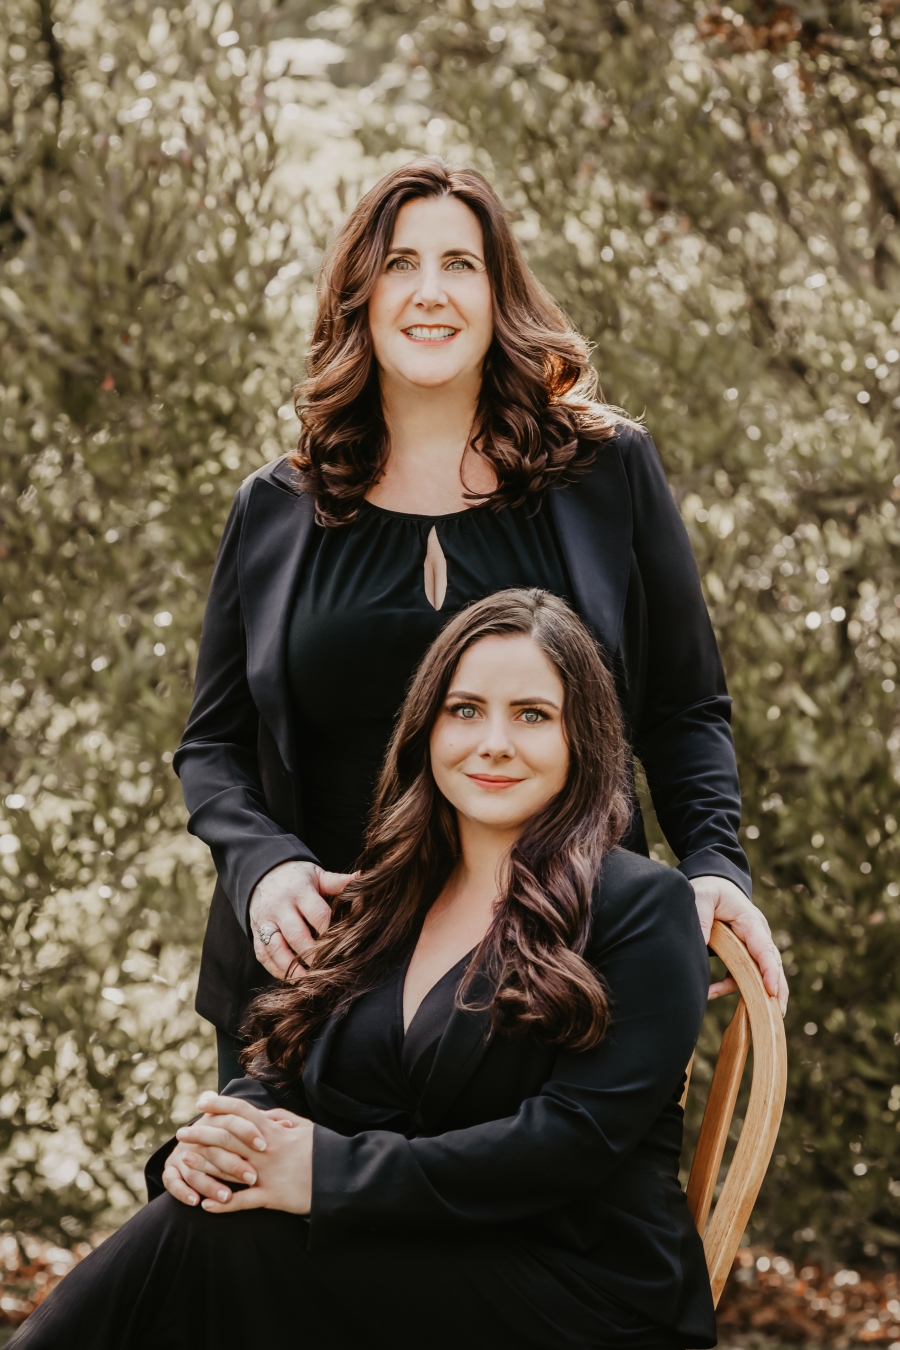 Main Stage: Kelli and Jullea Anderson of California Skincare Supply Inc.